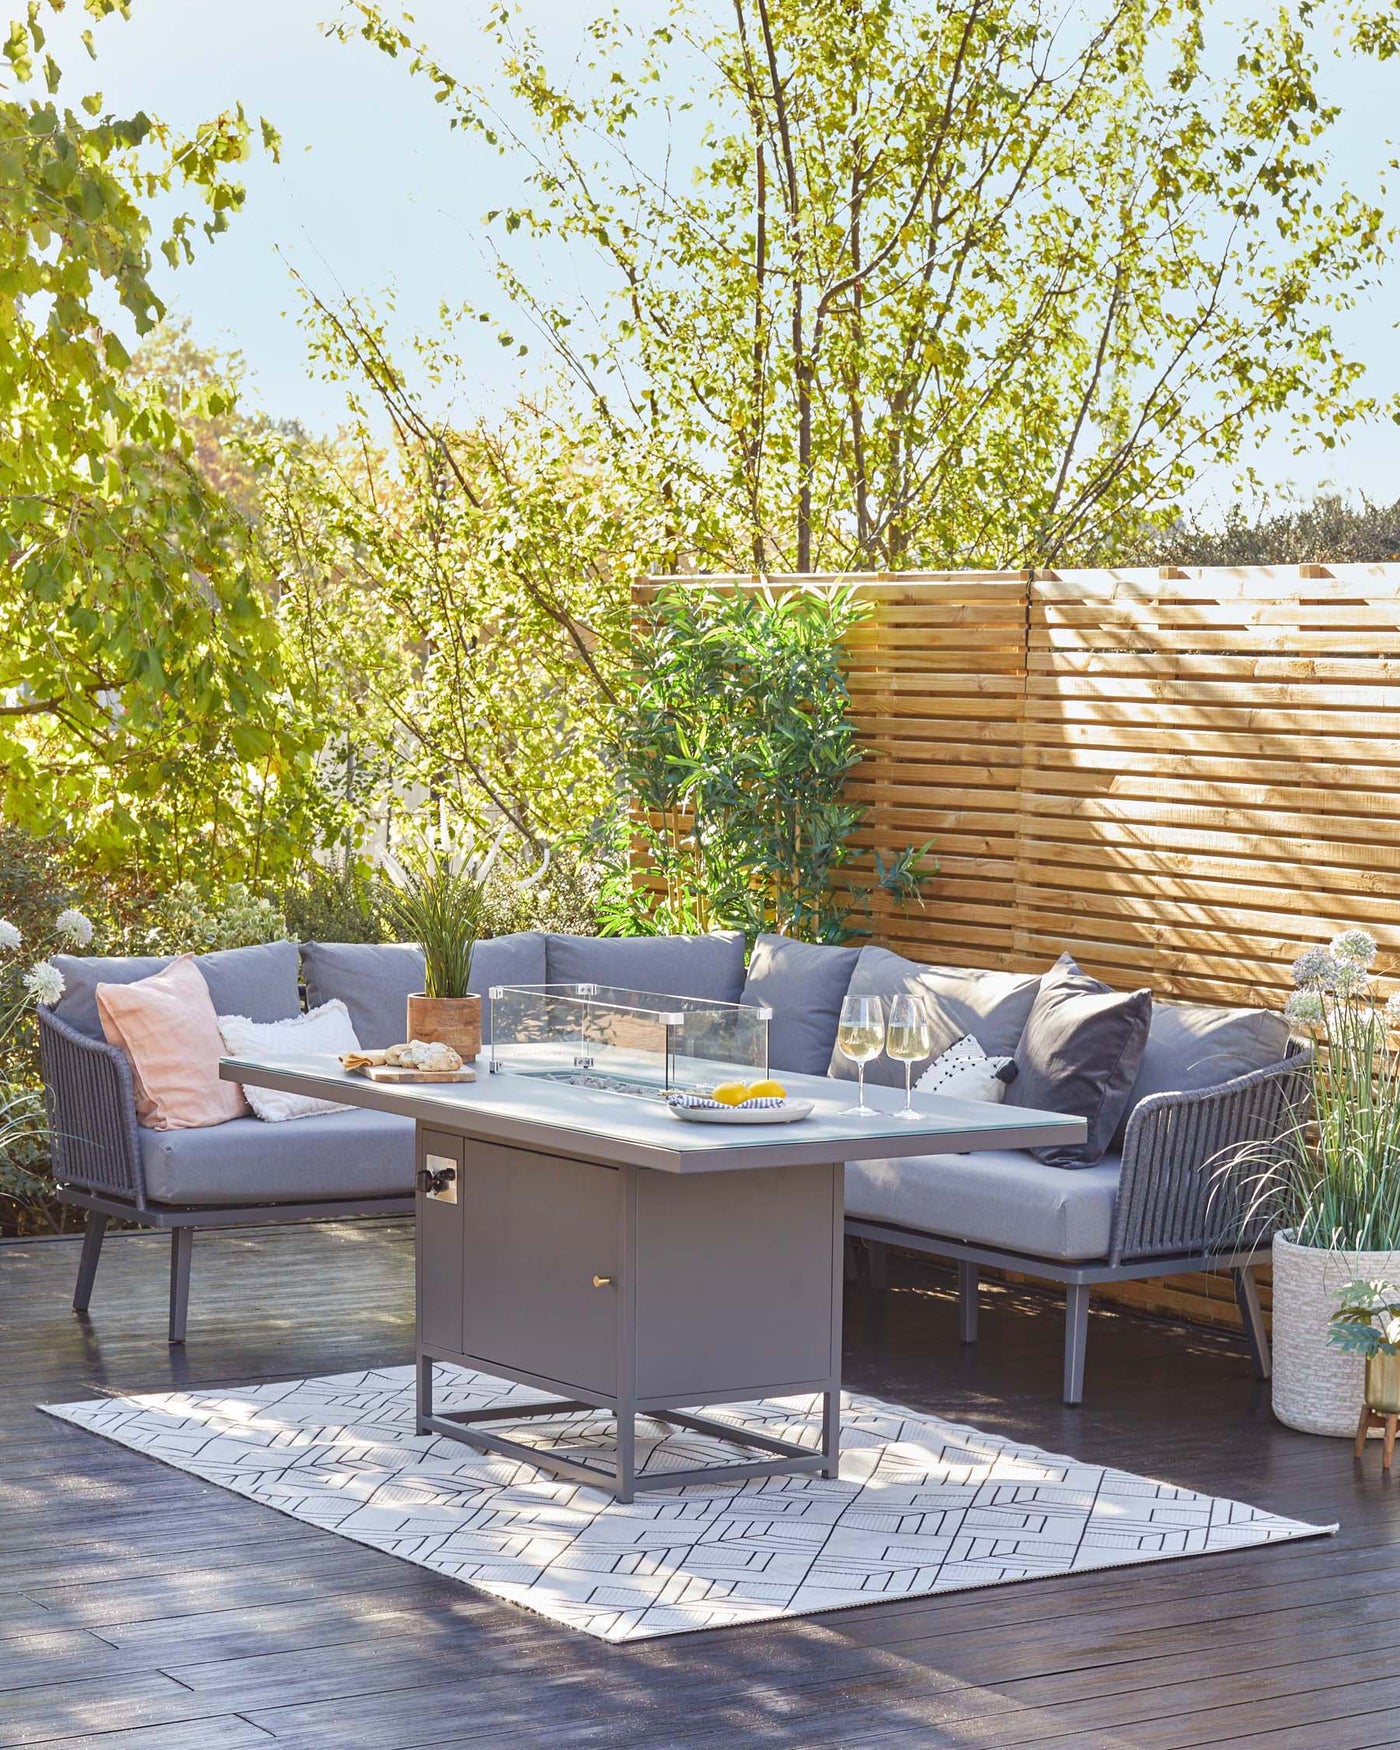 Outdoor patio furniture set featuring a modern grey sectional sofa with plush cushions, complemented by a sleek grey rectangular metal coffee table with a clear glass top. The set rests on a dark wooden deck, accented by a geometric-patterned outdoor rug beneath the table.